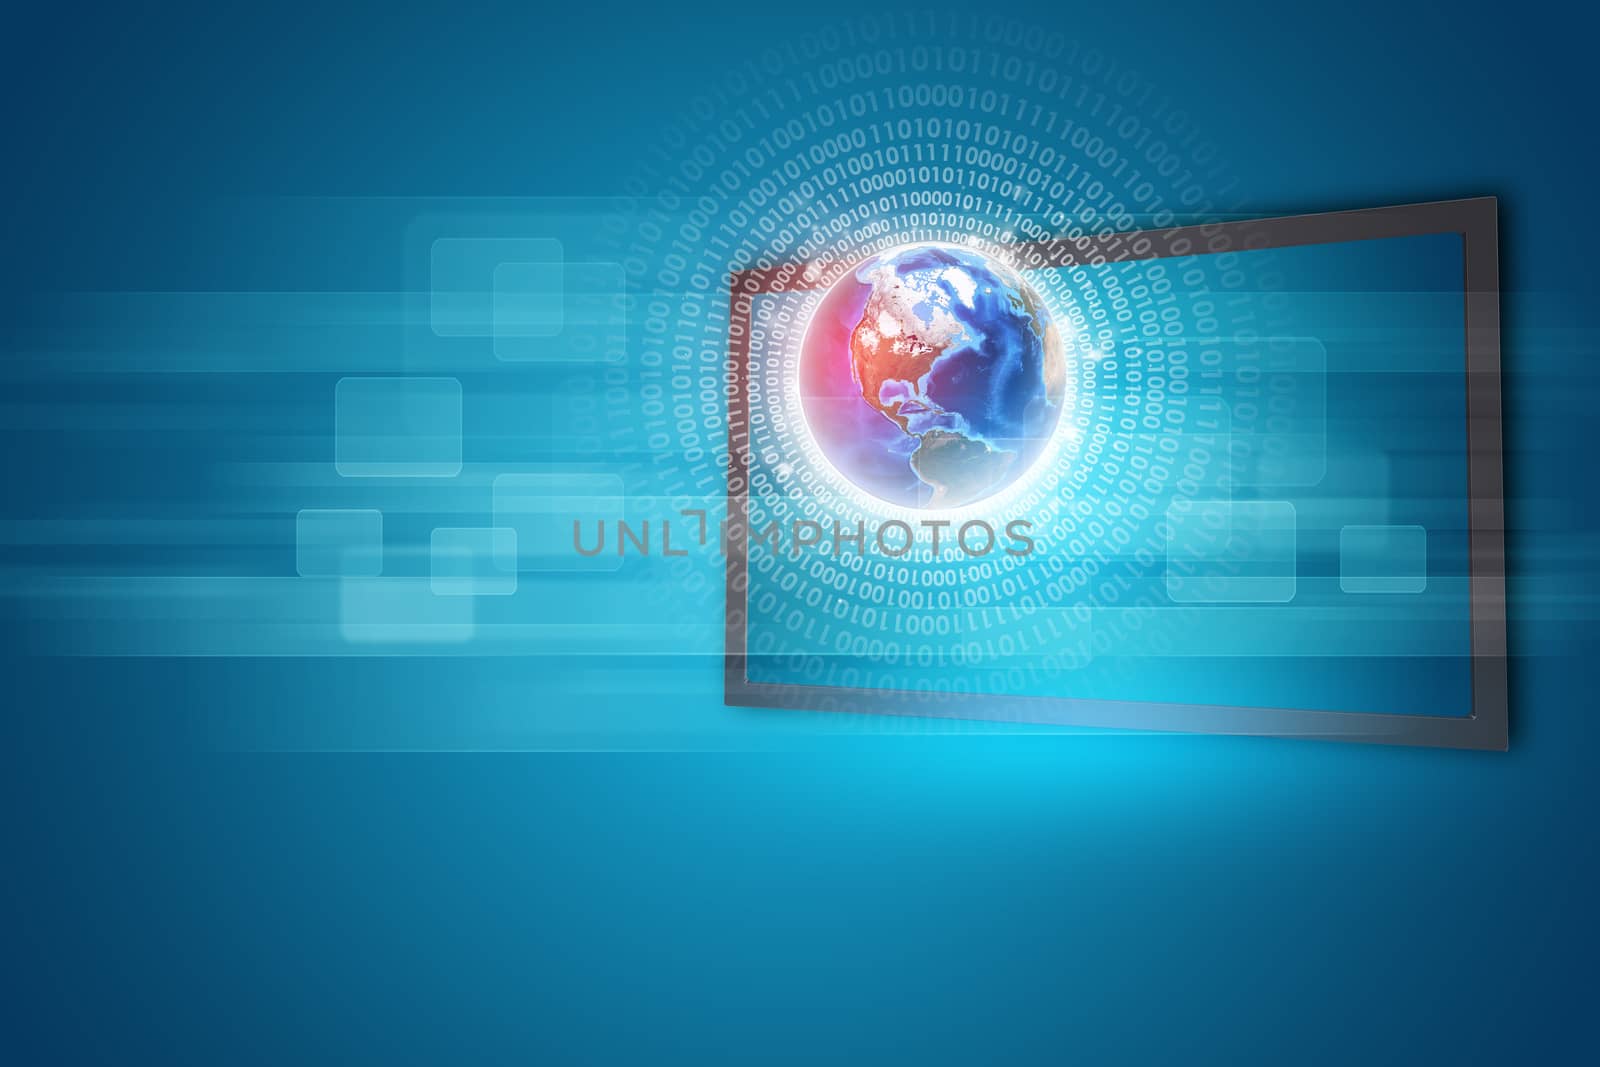 Touchscreen display with Globe and radiant figures, on blue background. Element of this image furnished by NASA